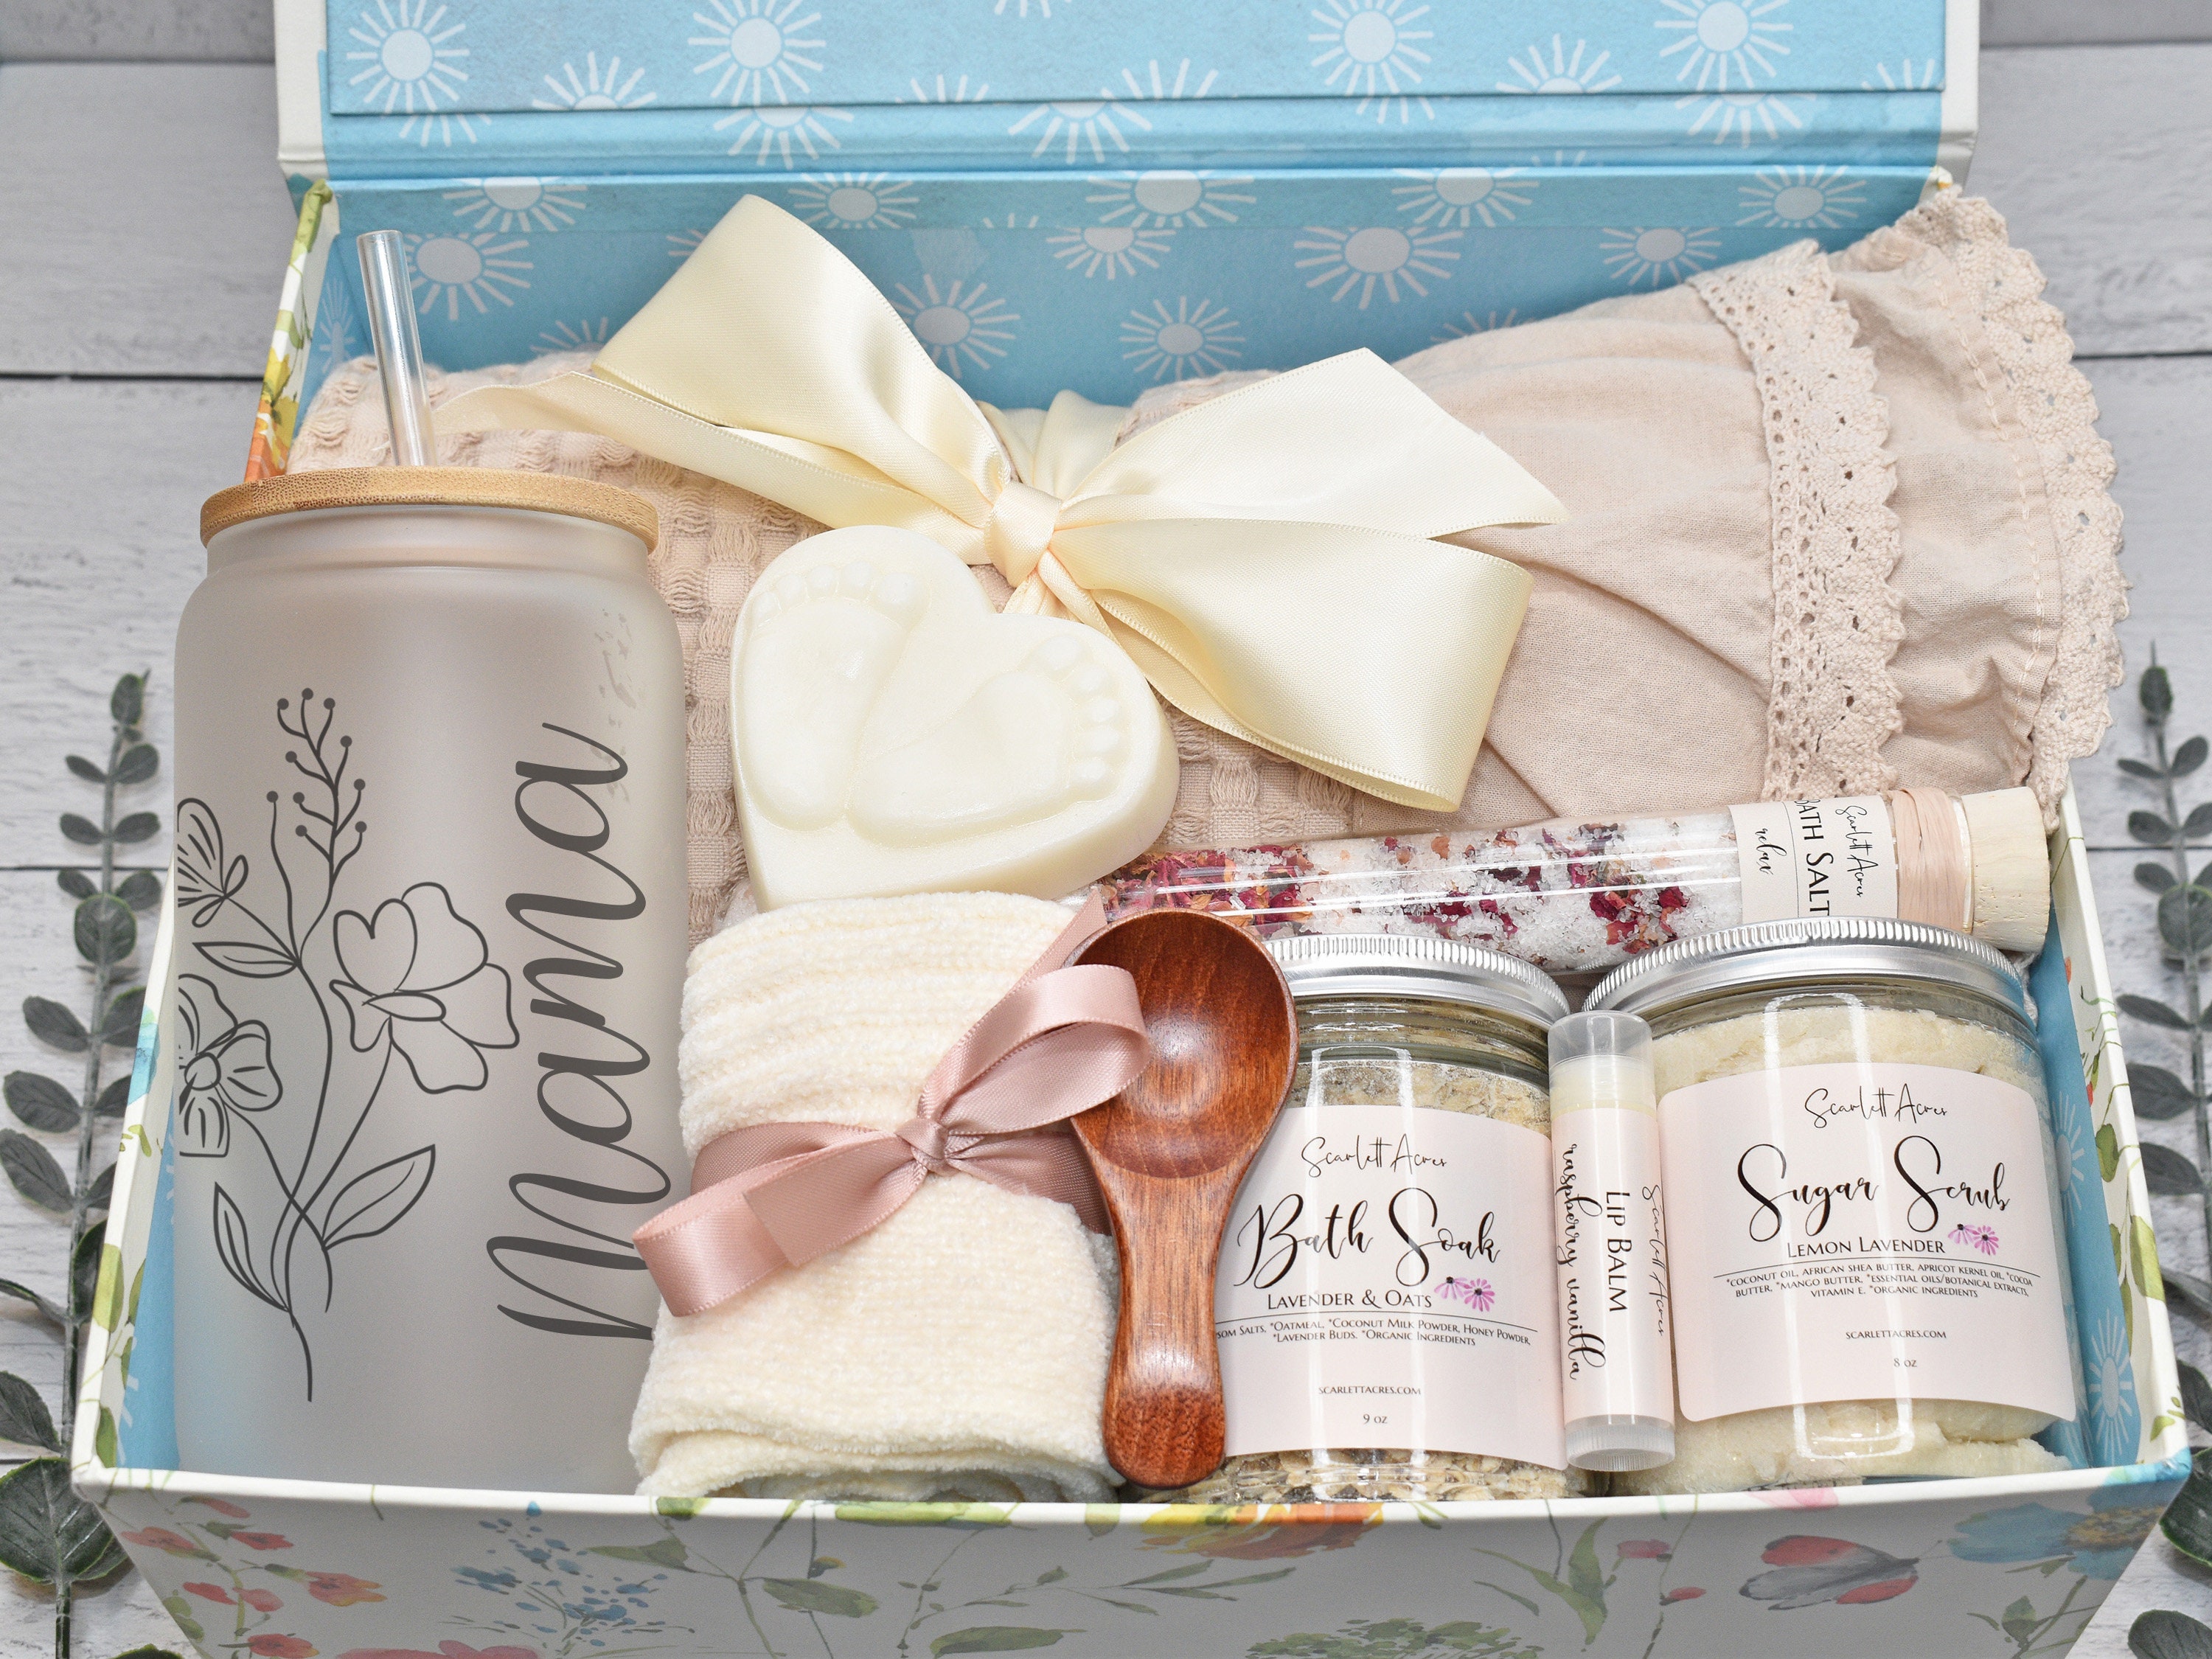 Zelica Ultimate New Mom Gifts, Care Package/Gift Basket, New Baby Gift, Expecting Pregnant Women, Mother to Be Baby Shower, Pregnancy or After Birth, Surgery